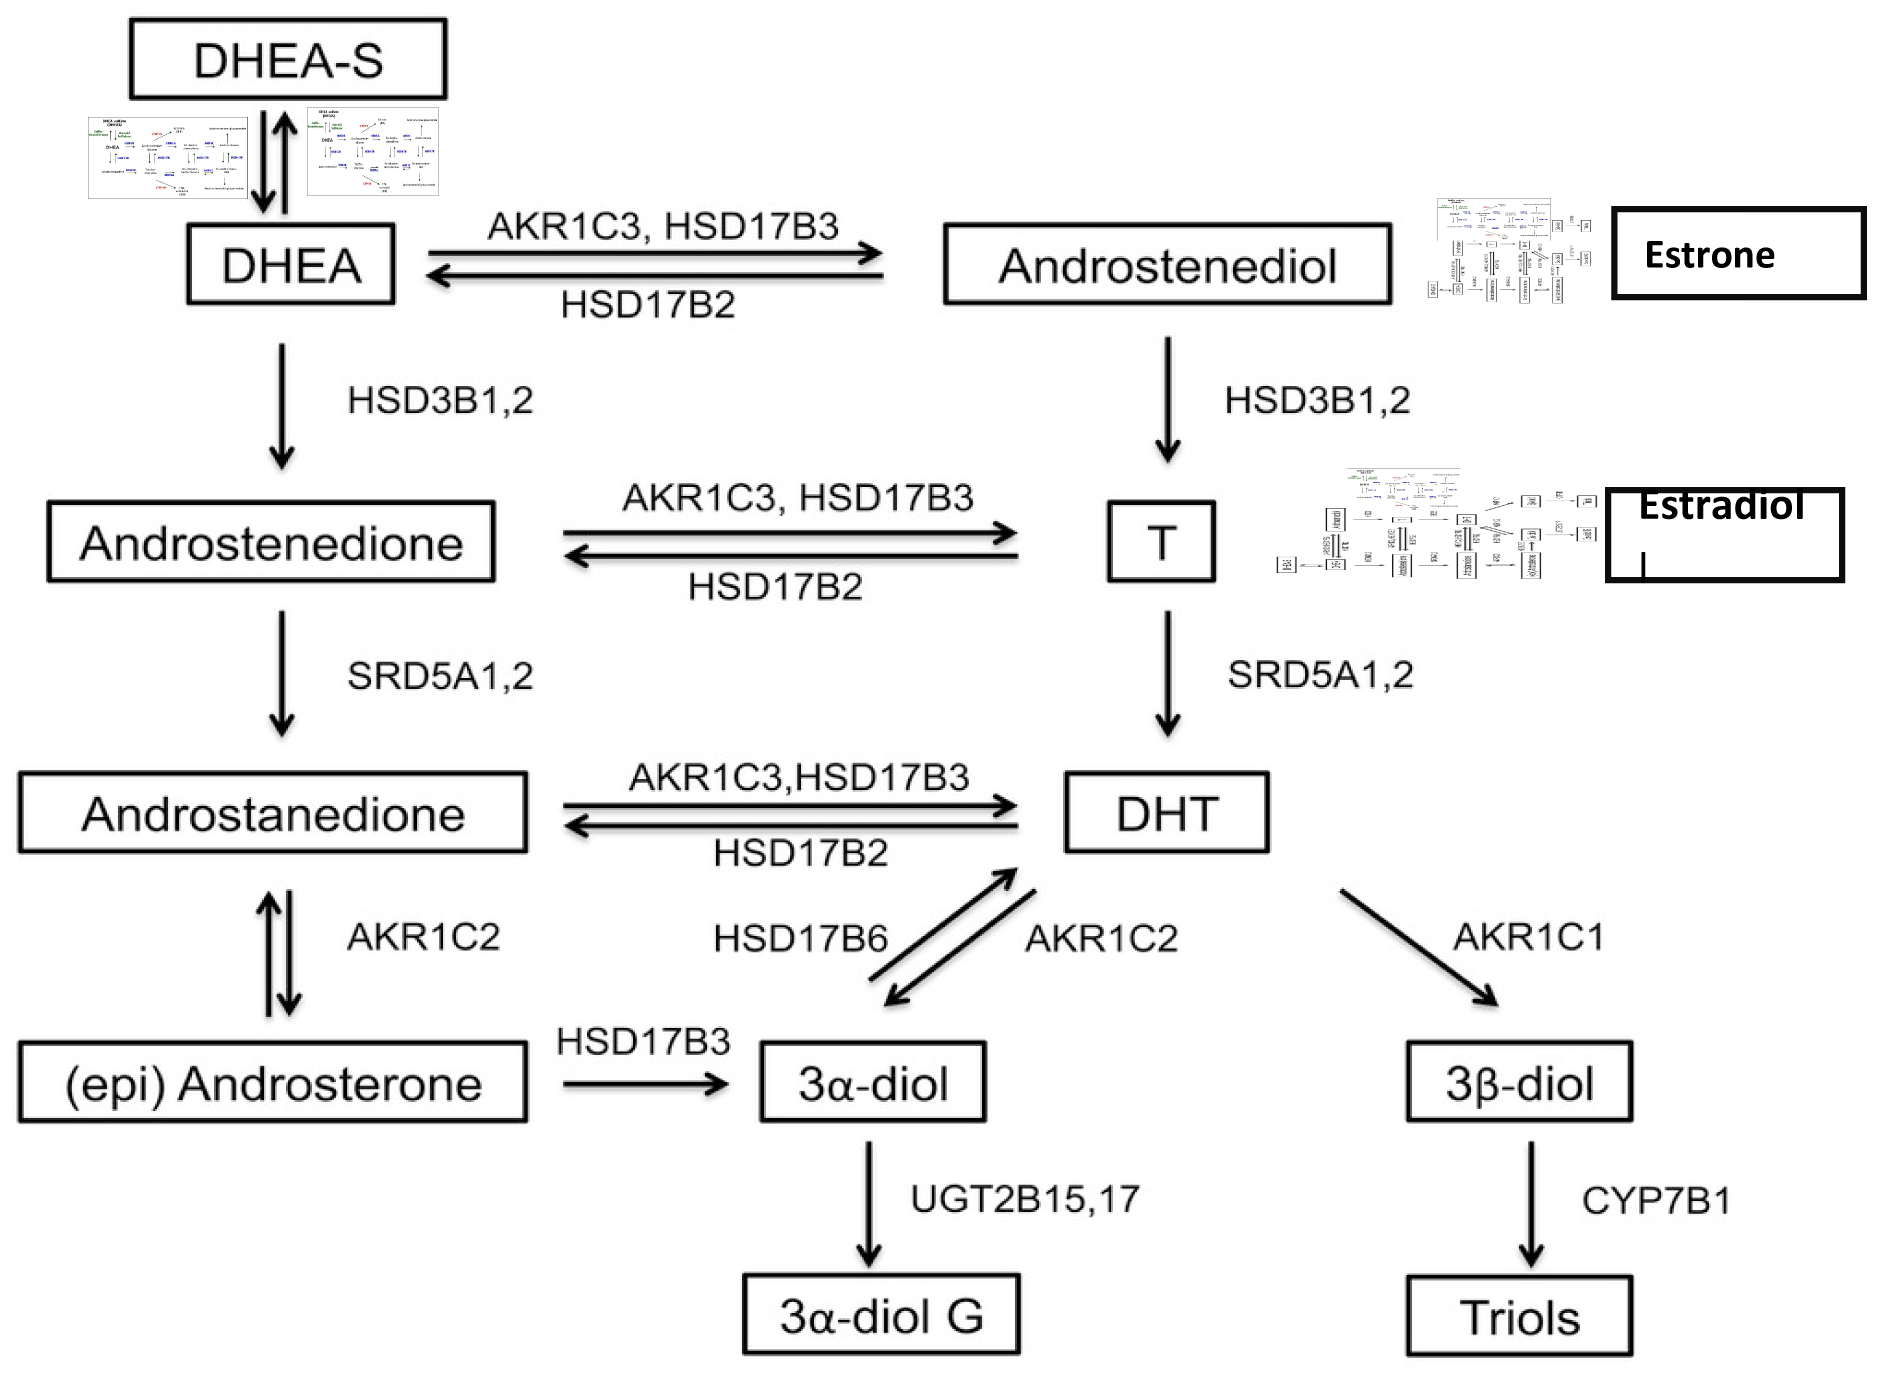 Metabolism of adrenal androgens ; HSD3B, 3 β-hydroxysteroid dehydrogenase isozymes; HSD17B, 17 β -hydroxysteroid dehydrogenase isozymes; SRD5A, 5α -reductase isozymes; AKR1C, aldo-keto reductases 1C; CYP19, P450 aromatase.